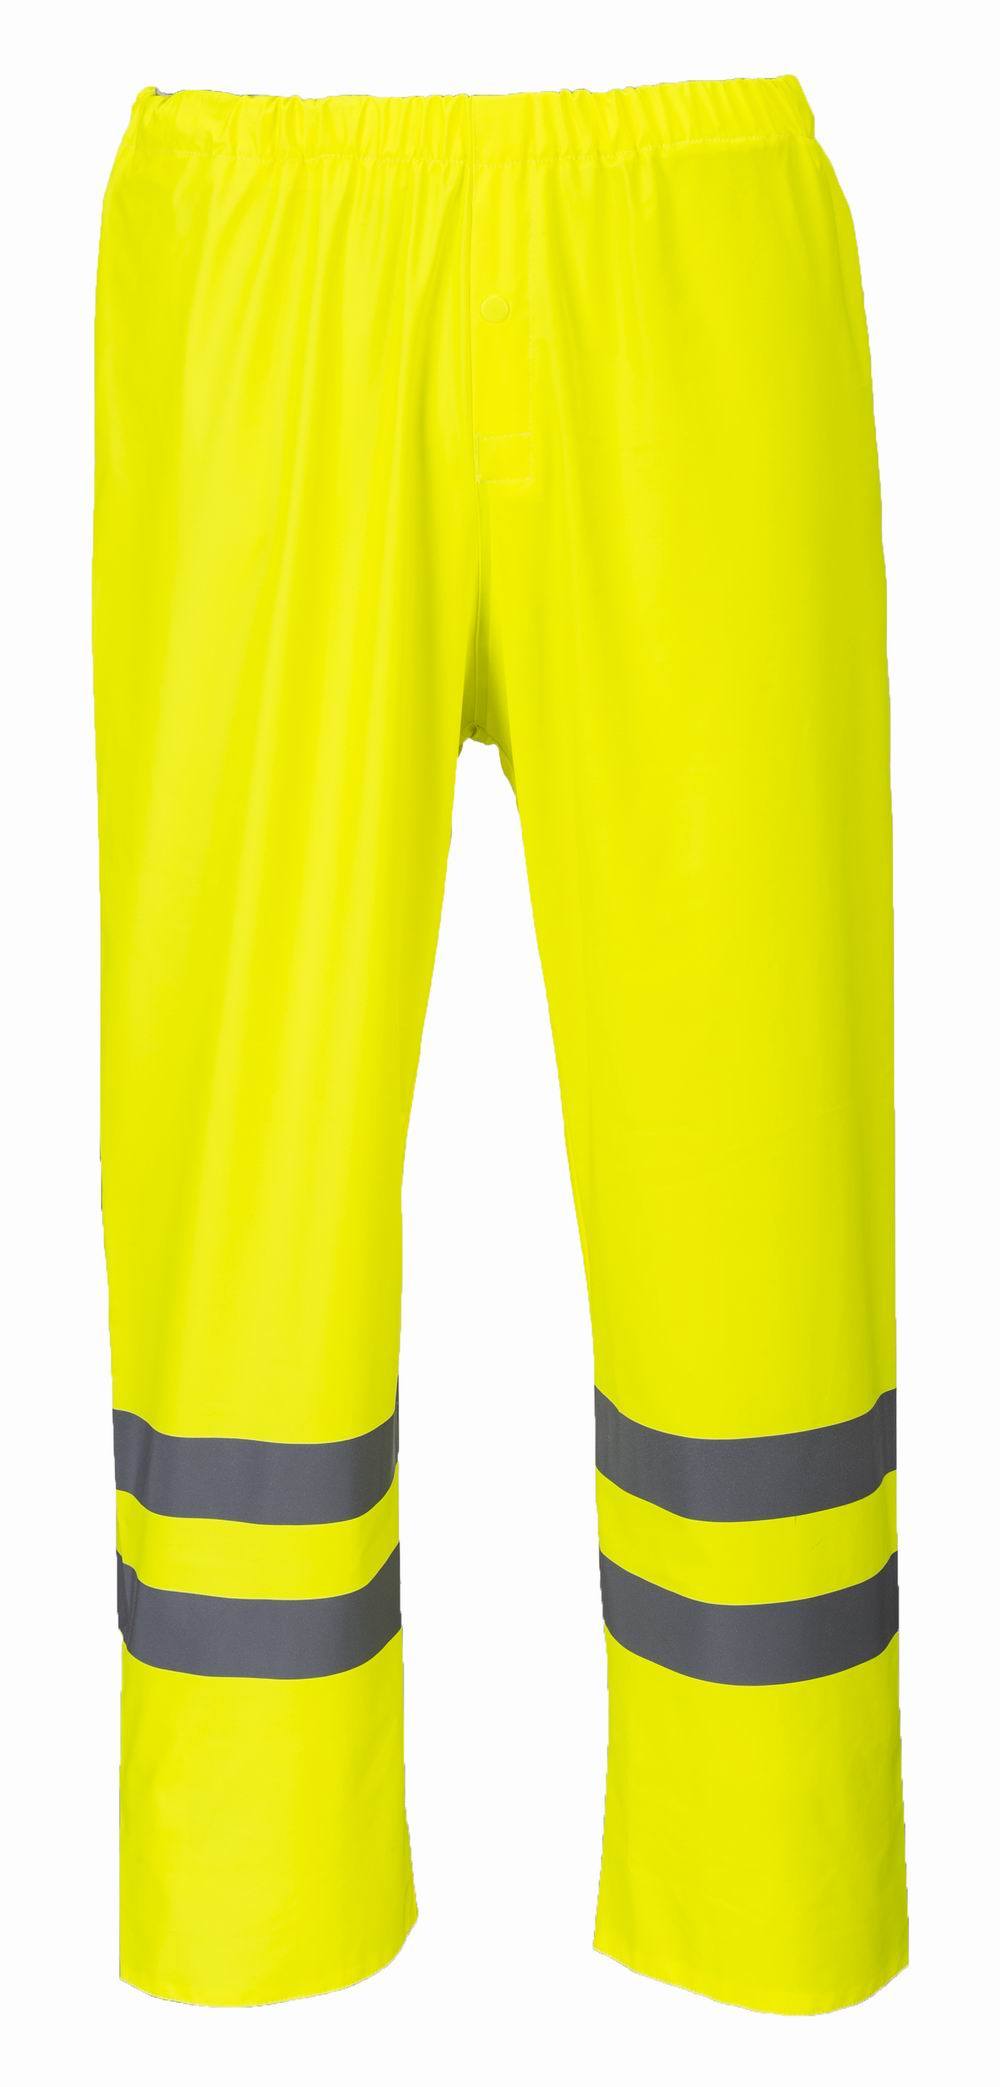 Work Wear Pants Cheap Safety Trousers Used Hi-Vis